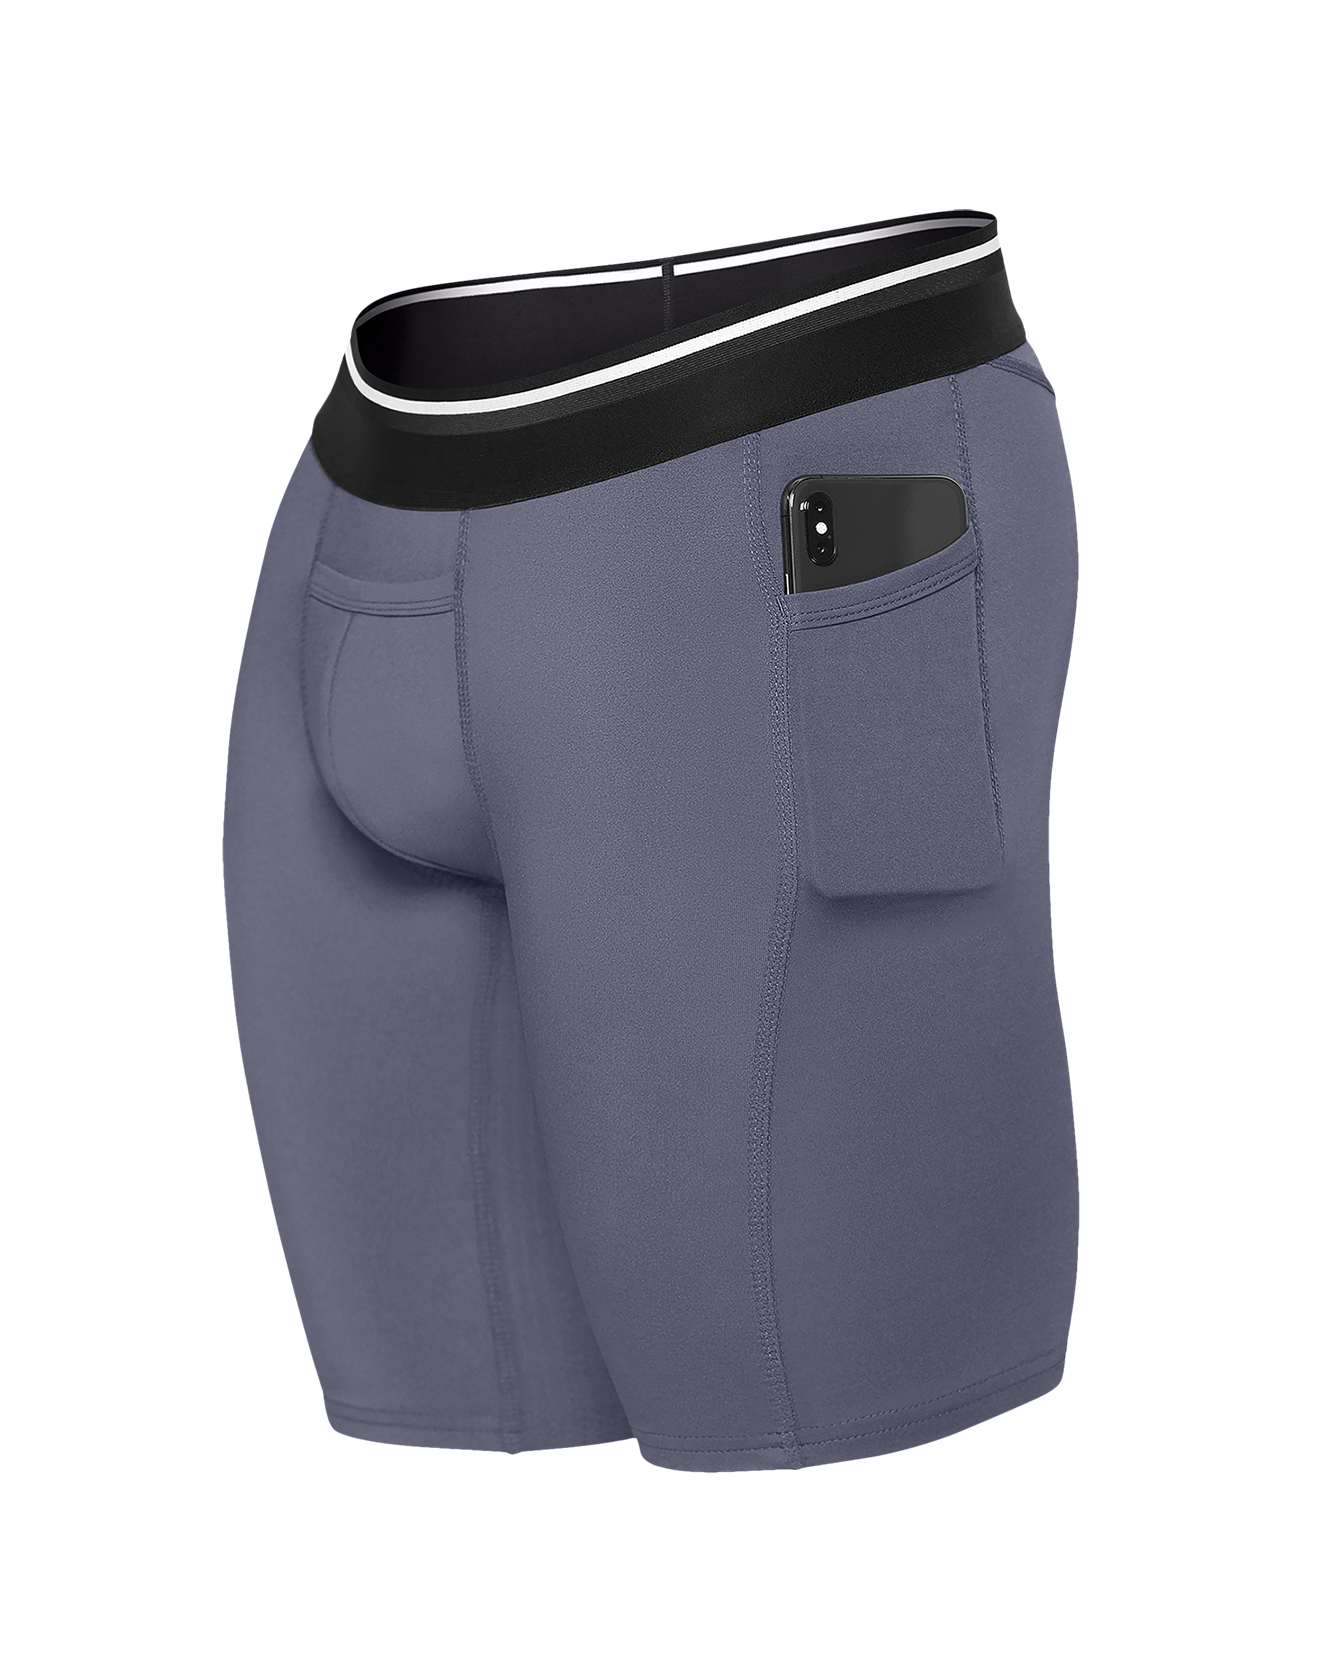 Endurance Compression Shorts for Men– Baselayer|All Athletic Citizens